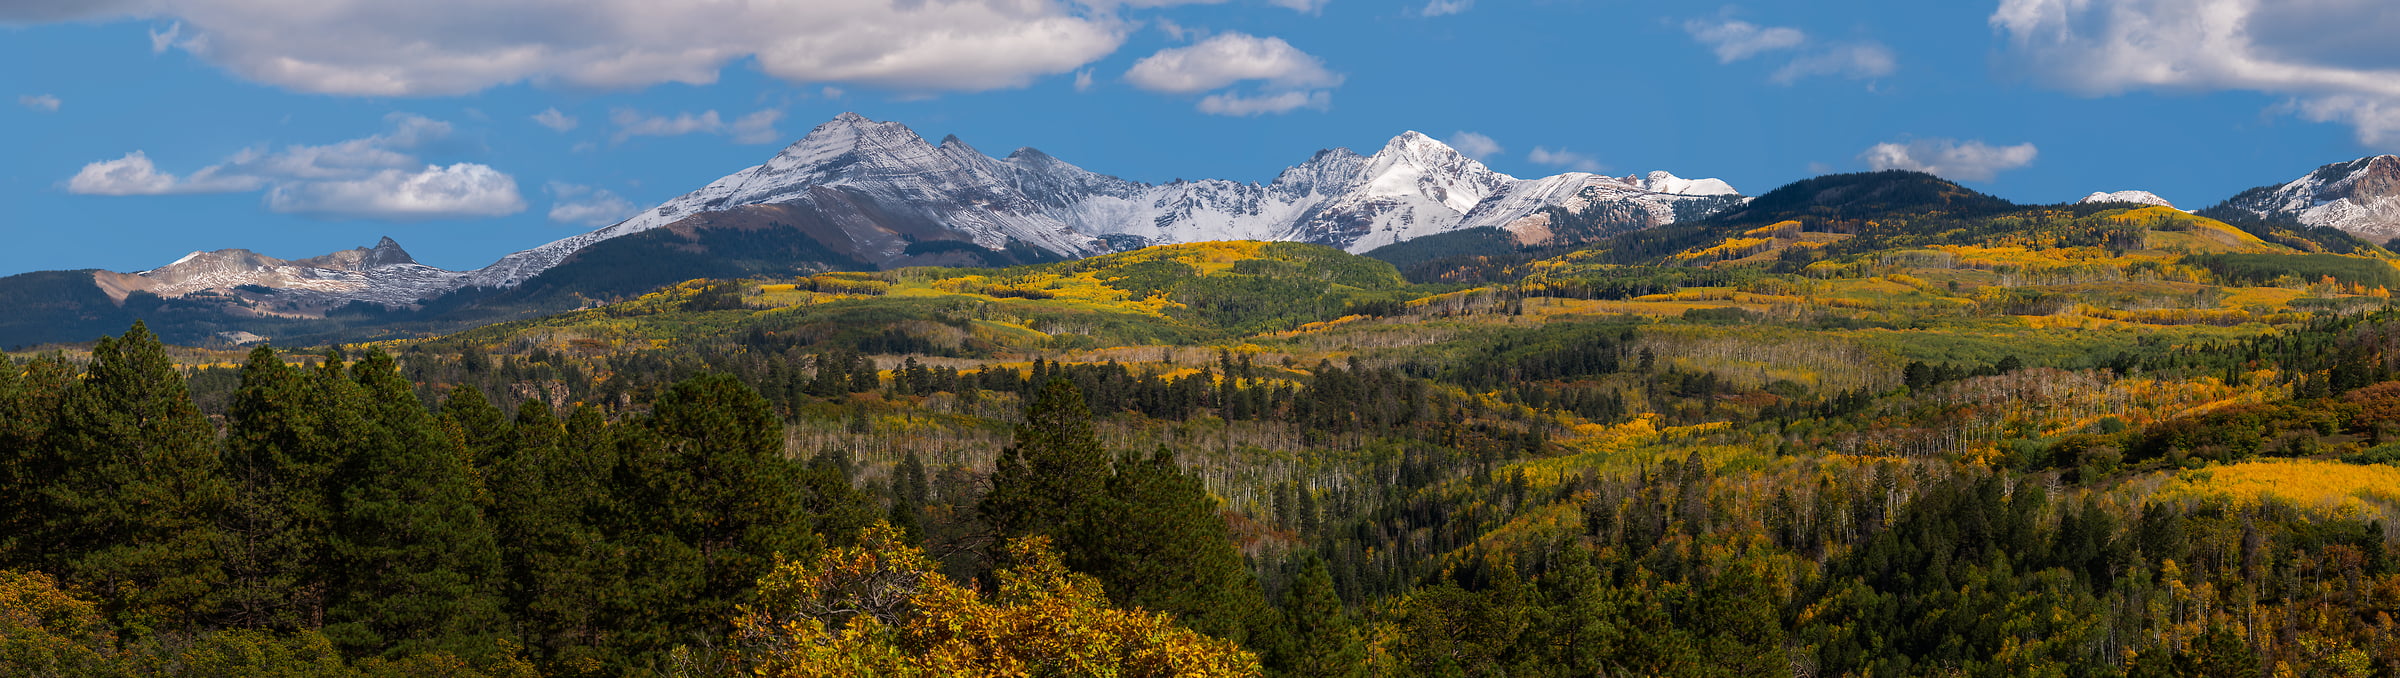 409 megapixels! A very high resolution, large-format VAST photo print of Colorado landscape in autumn with Mt. Hesperus in the background; photograph created by Phillip Noll.